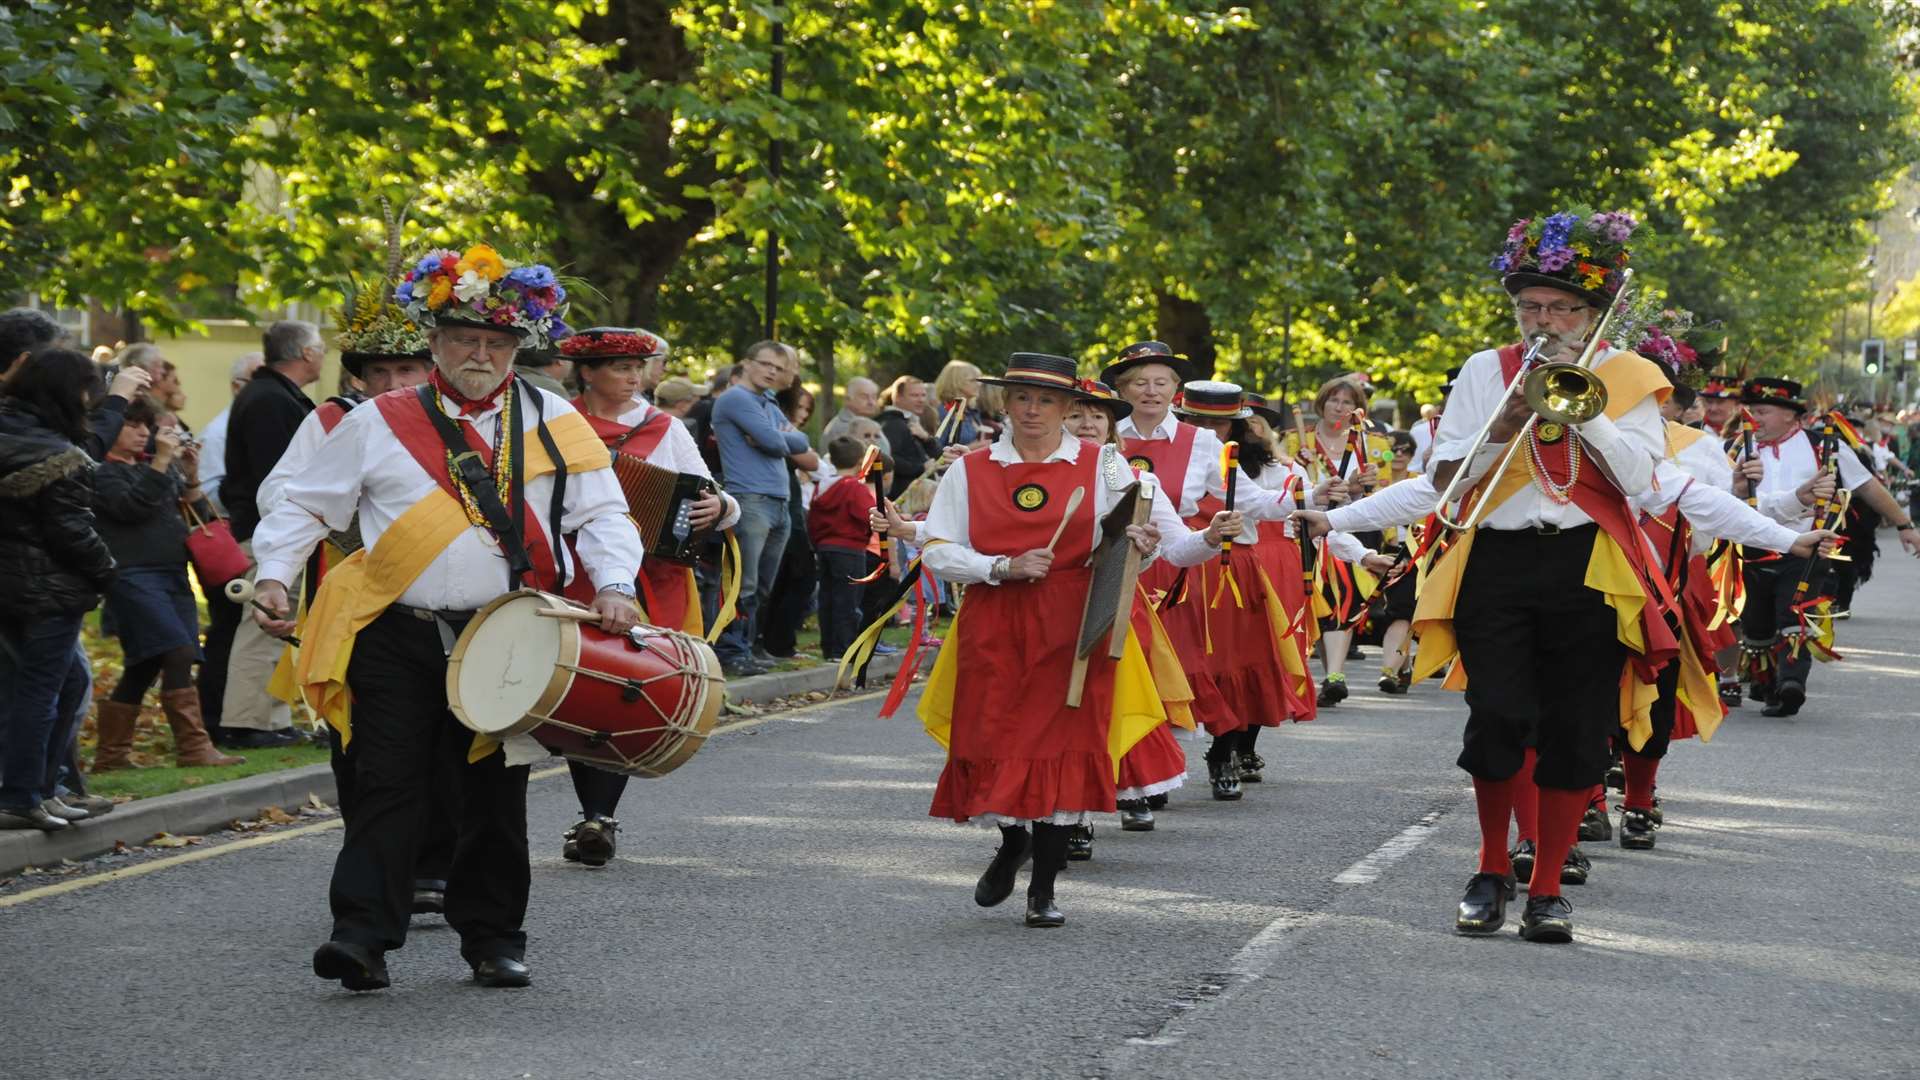 The Tenterden Folk Festival is a popular event. Picture by Paul Amos